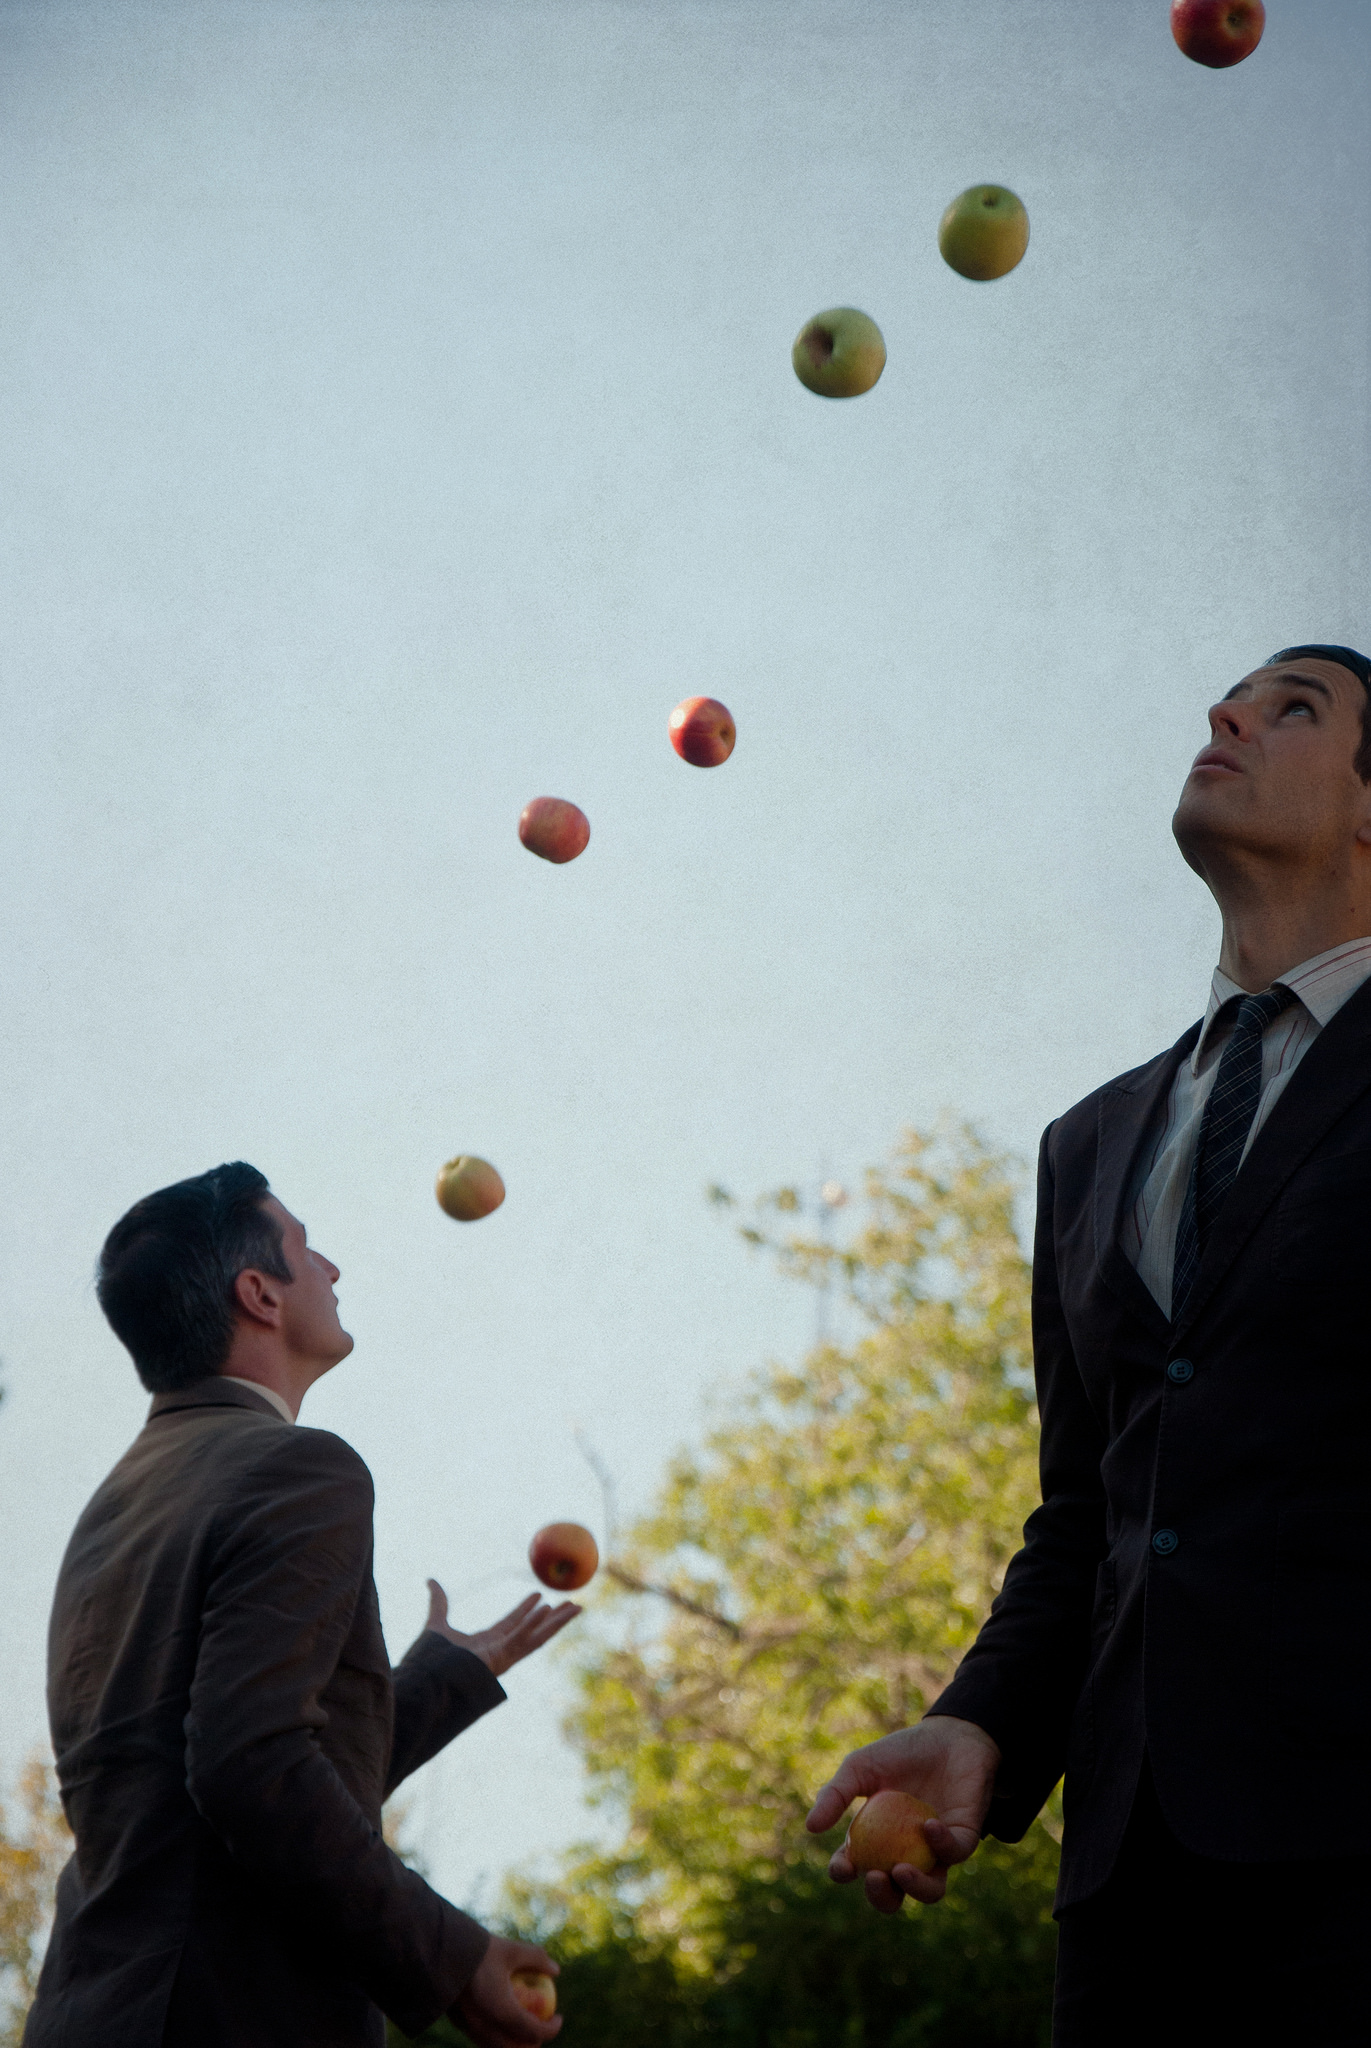 Two men in business suits juggle apples